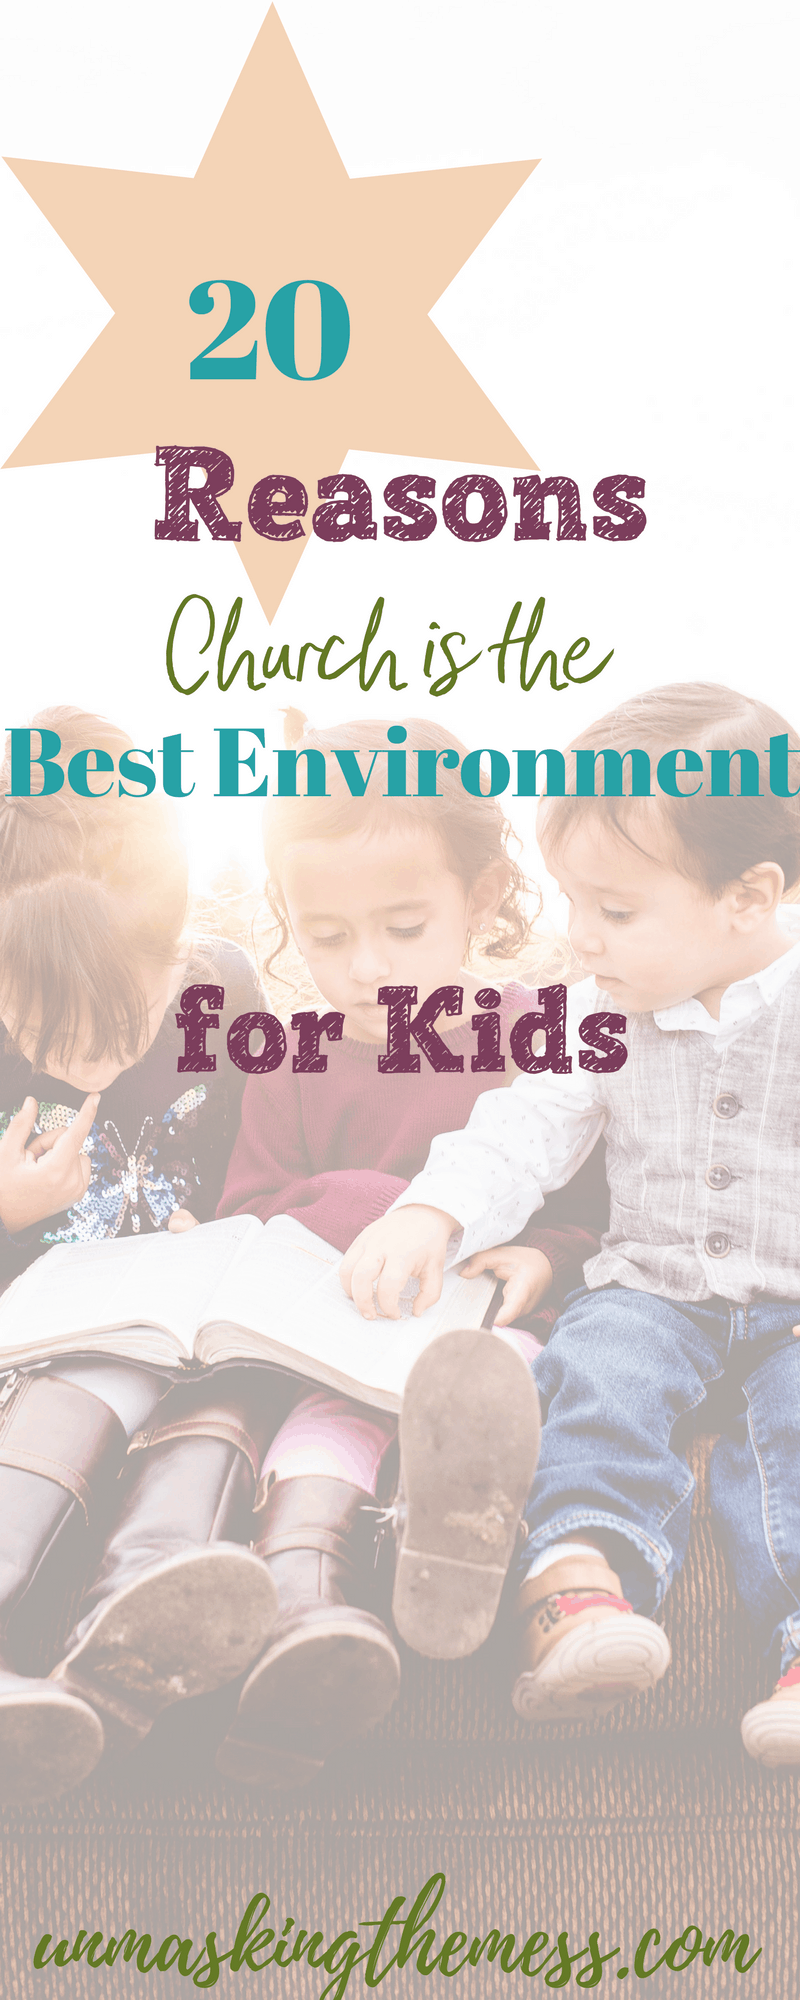 20 Reasons Church is the Best Environment for Kids. Teaching our kids why they need church. What can they learn there? How does church help in life? Ideas, quotes and tips on church for kids.